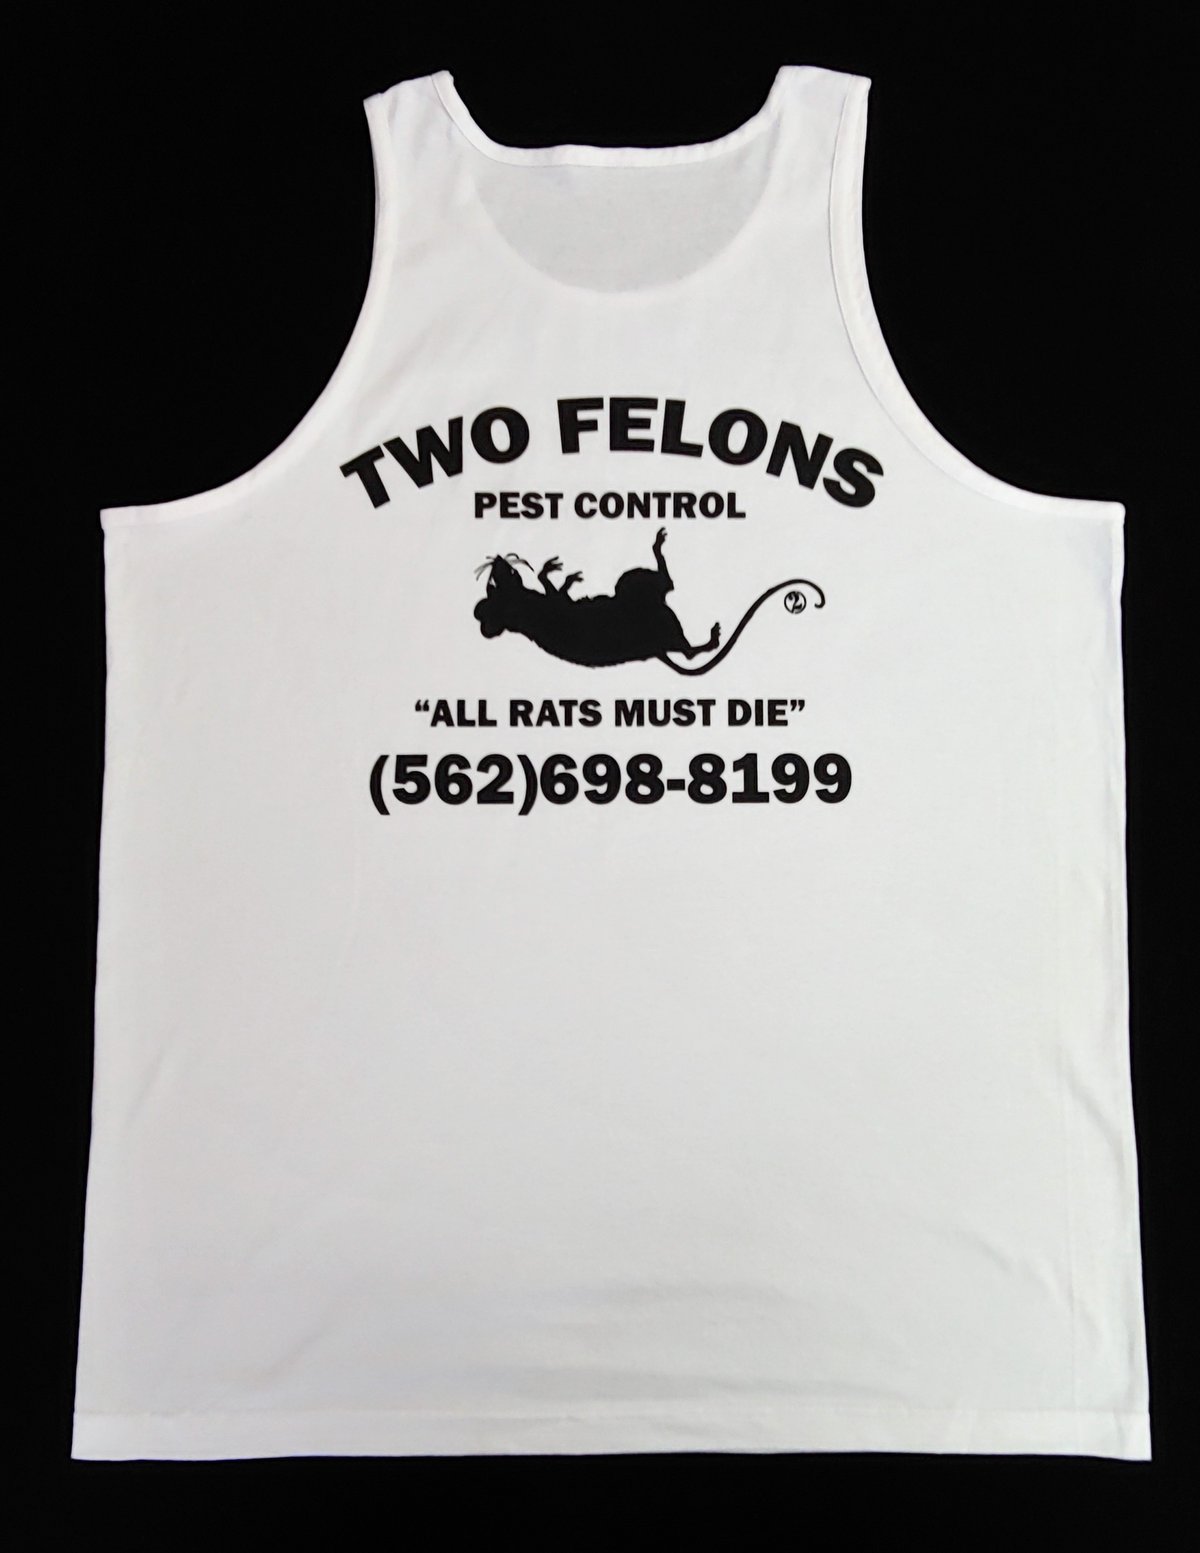 Two Felons "Pest Control" tank top (white) 